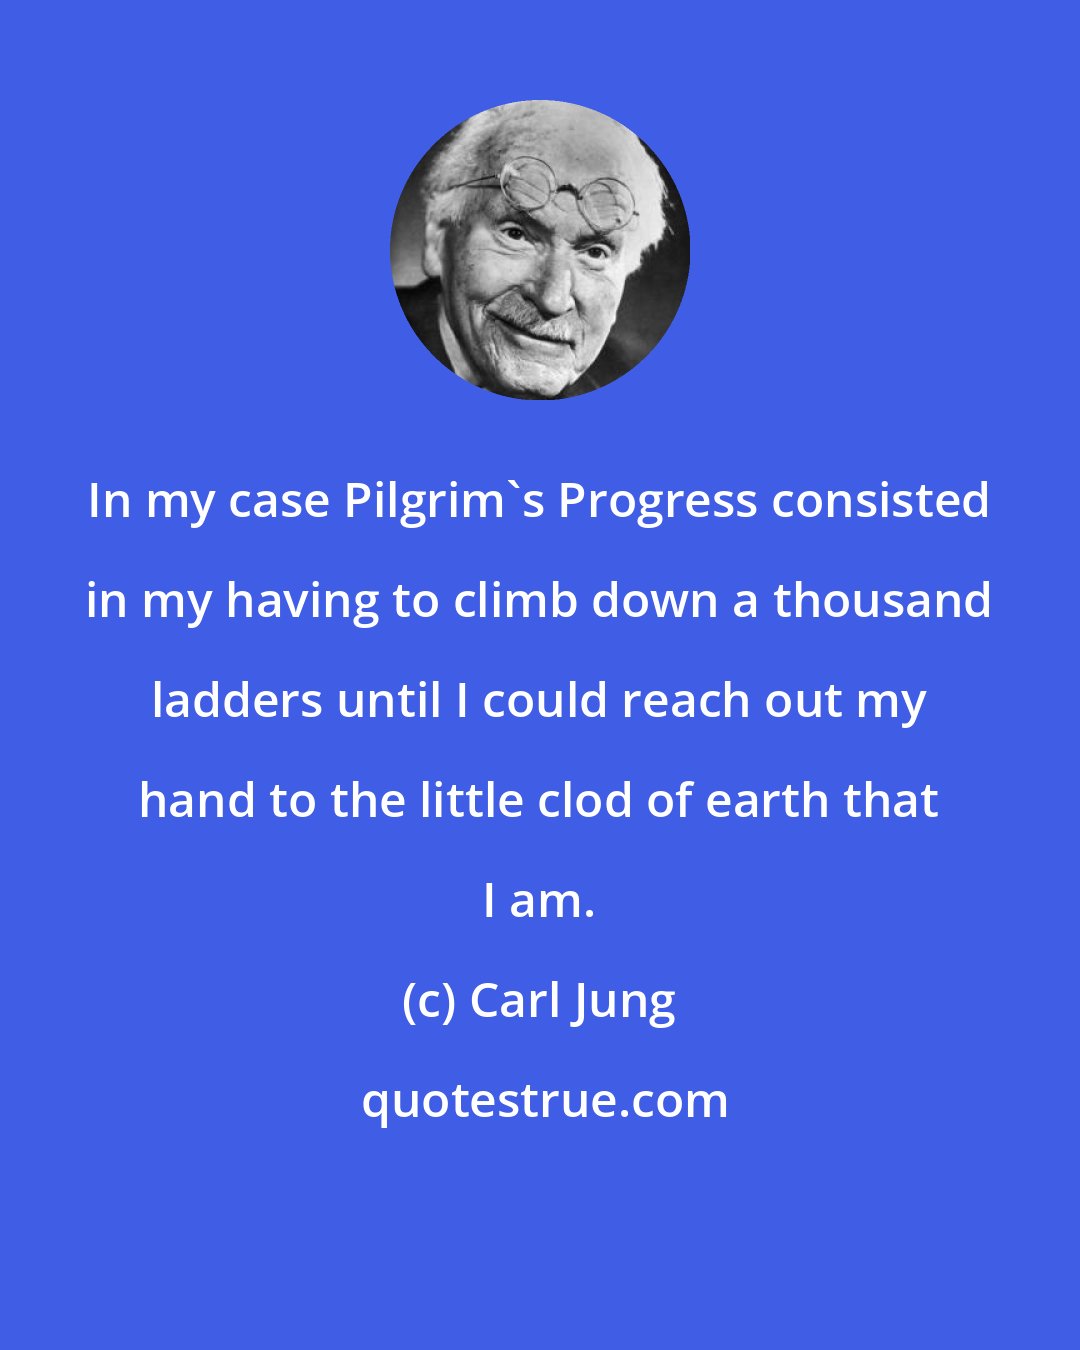 Carl Jung: In my case Pilgrim's Progress consisted in my having to climb down a thousand ladders until I could reach out my hand to the little clod of earth that I am.